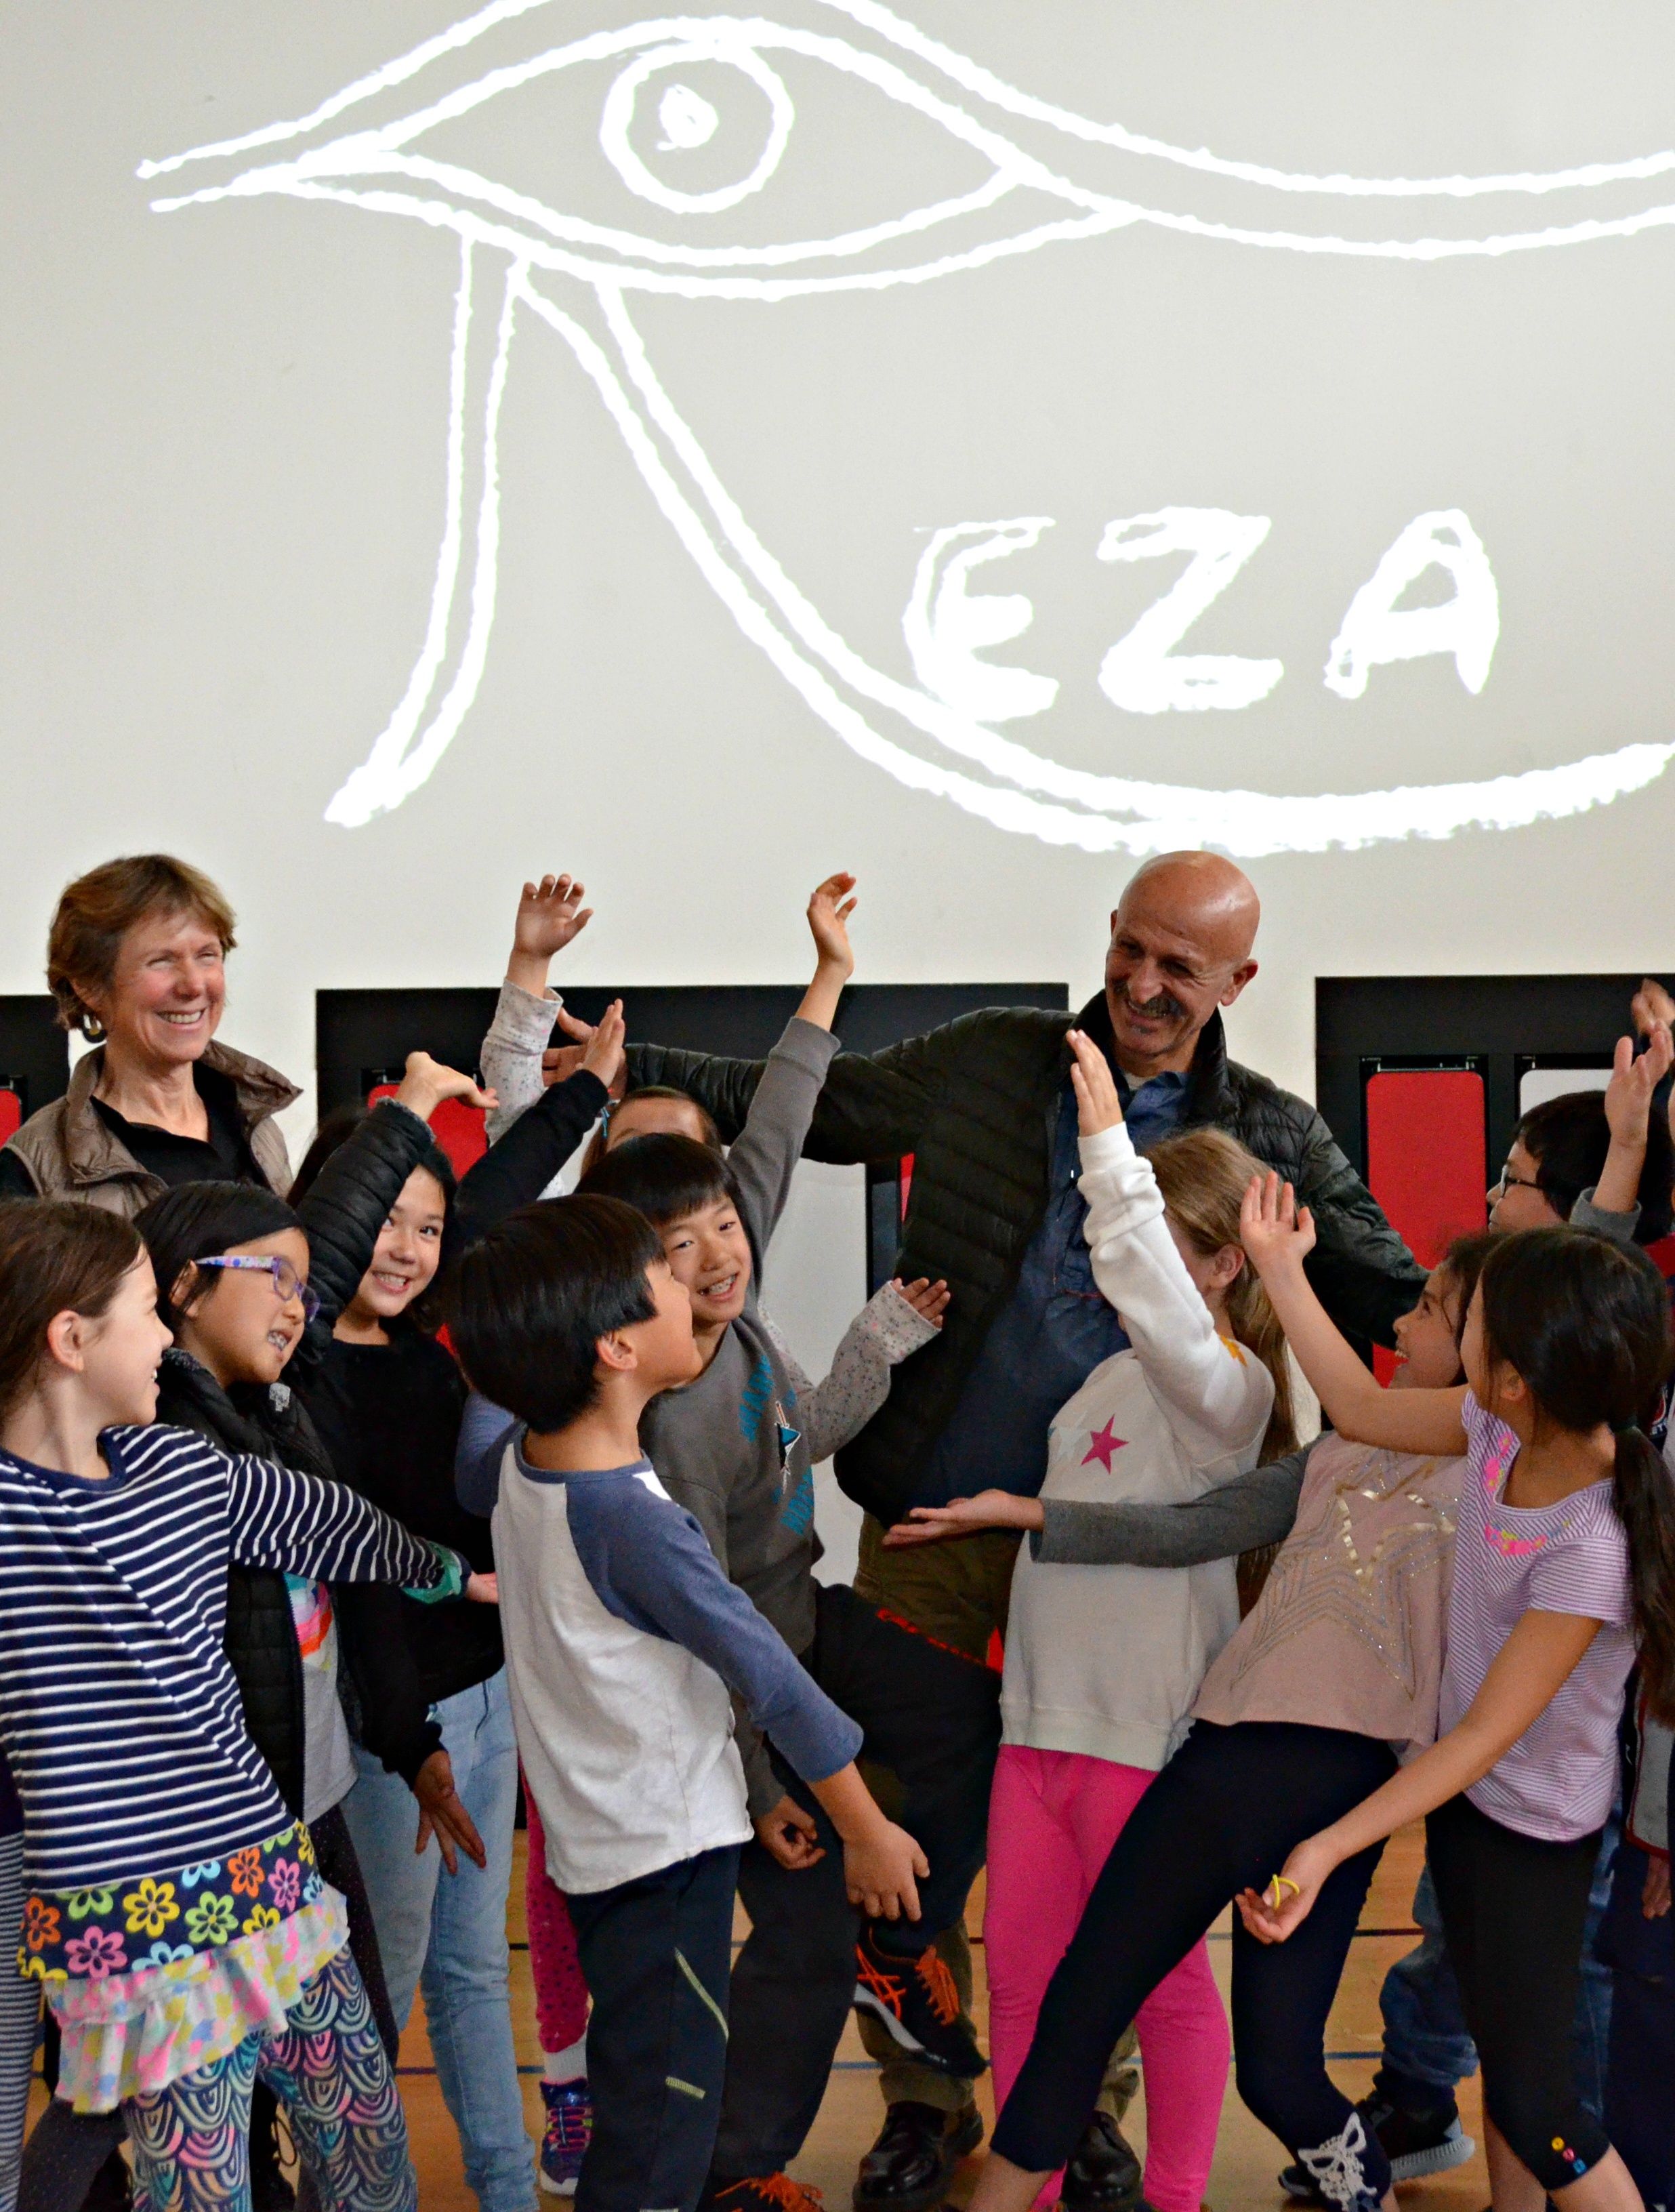 Humanitarian and Renowned Photographer, Reza Talks to Students About Social Change Through Art